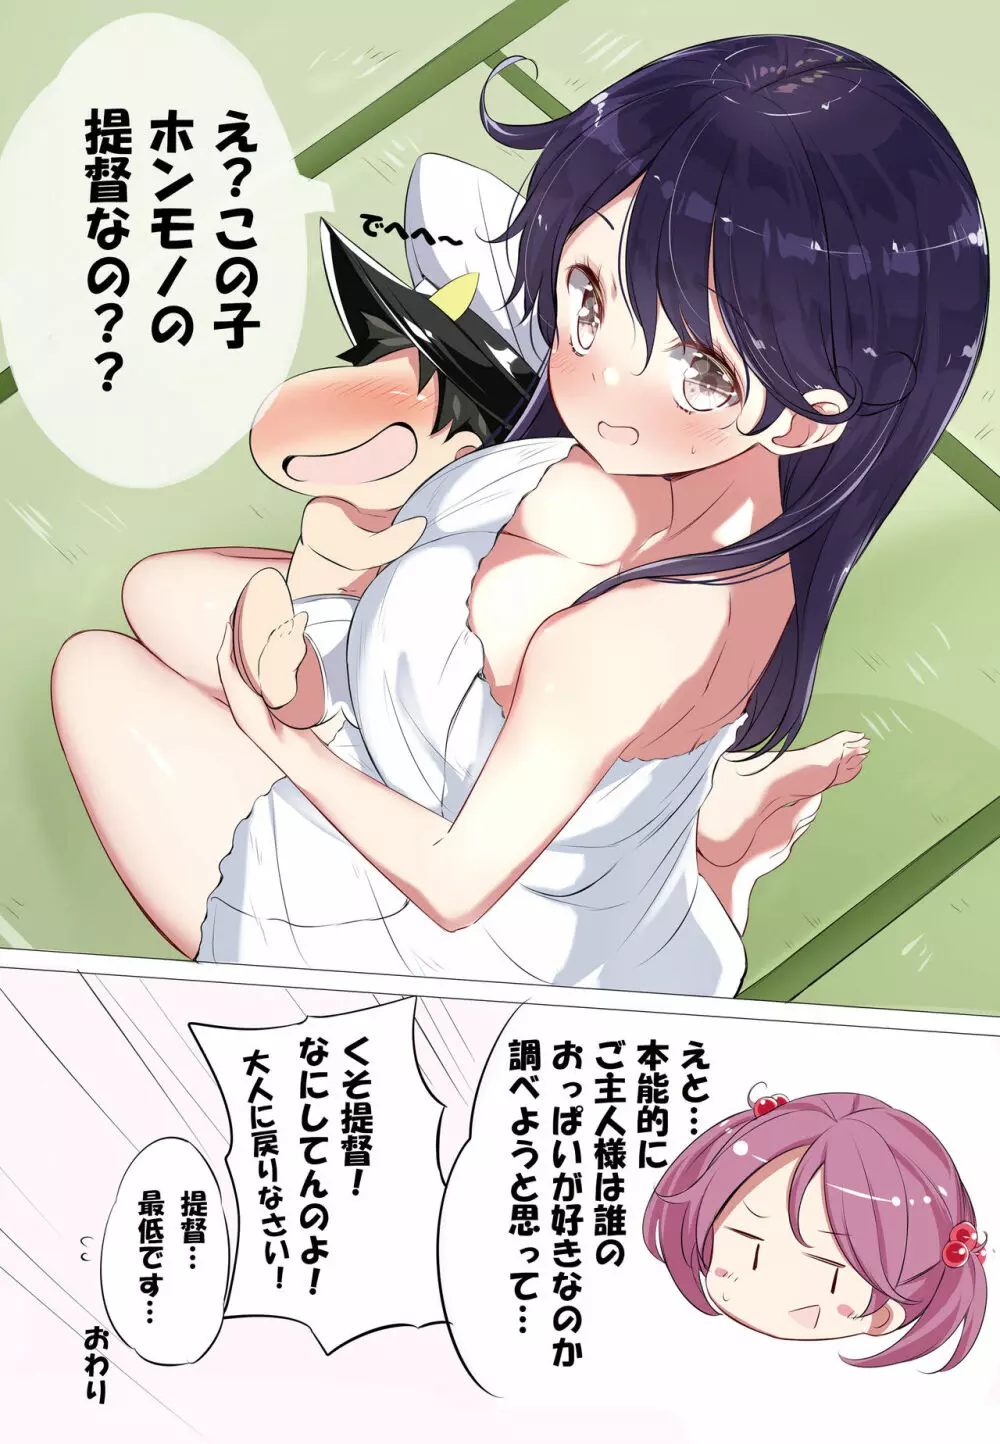 hamaken collection 総集編vol 9～12 プラス 七駆の乳くらべ Page.9